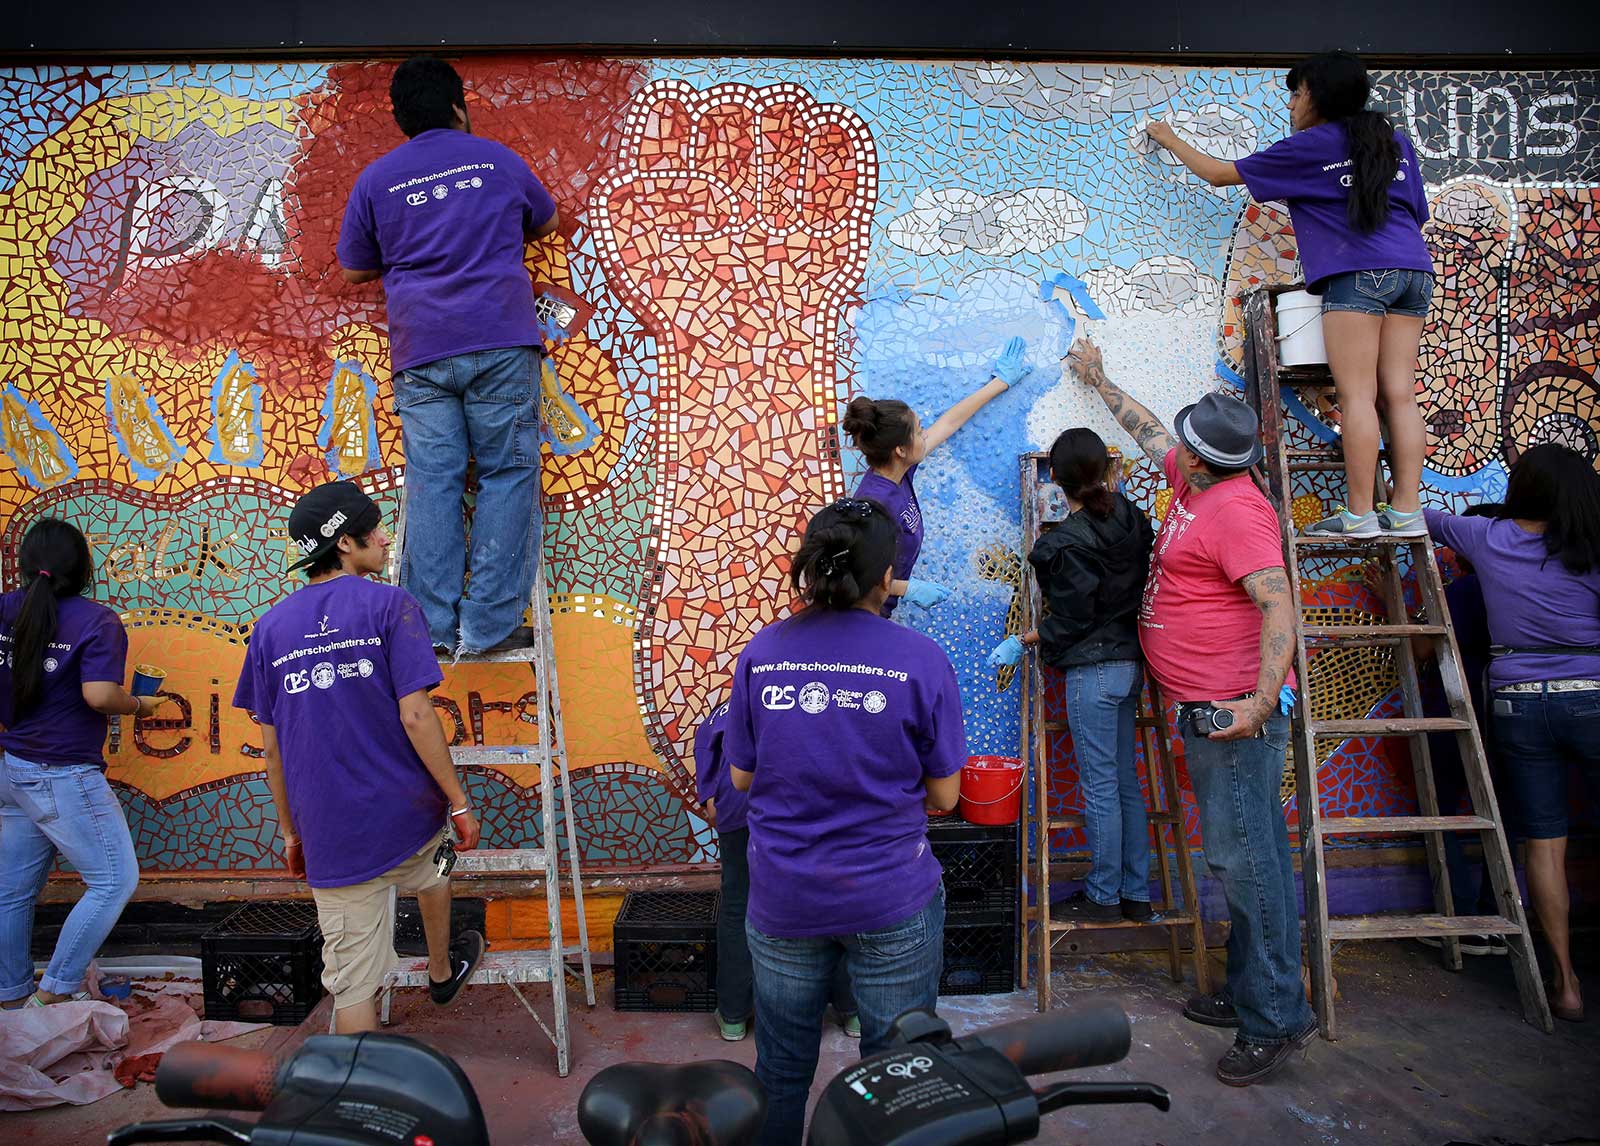 LSWO staff in purple shirts painting public mural with community memebers